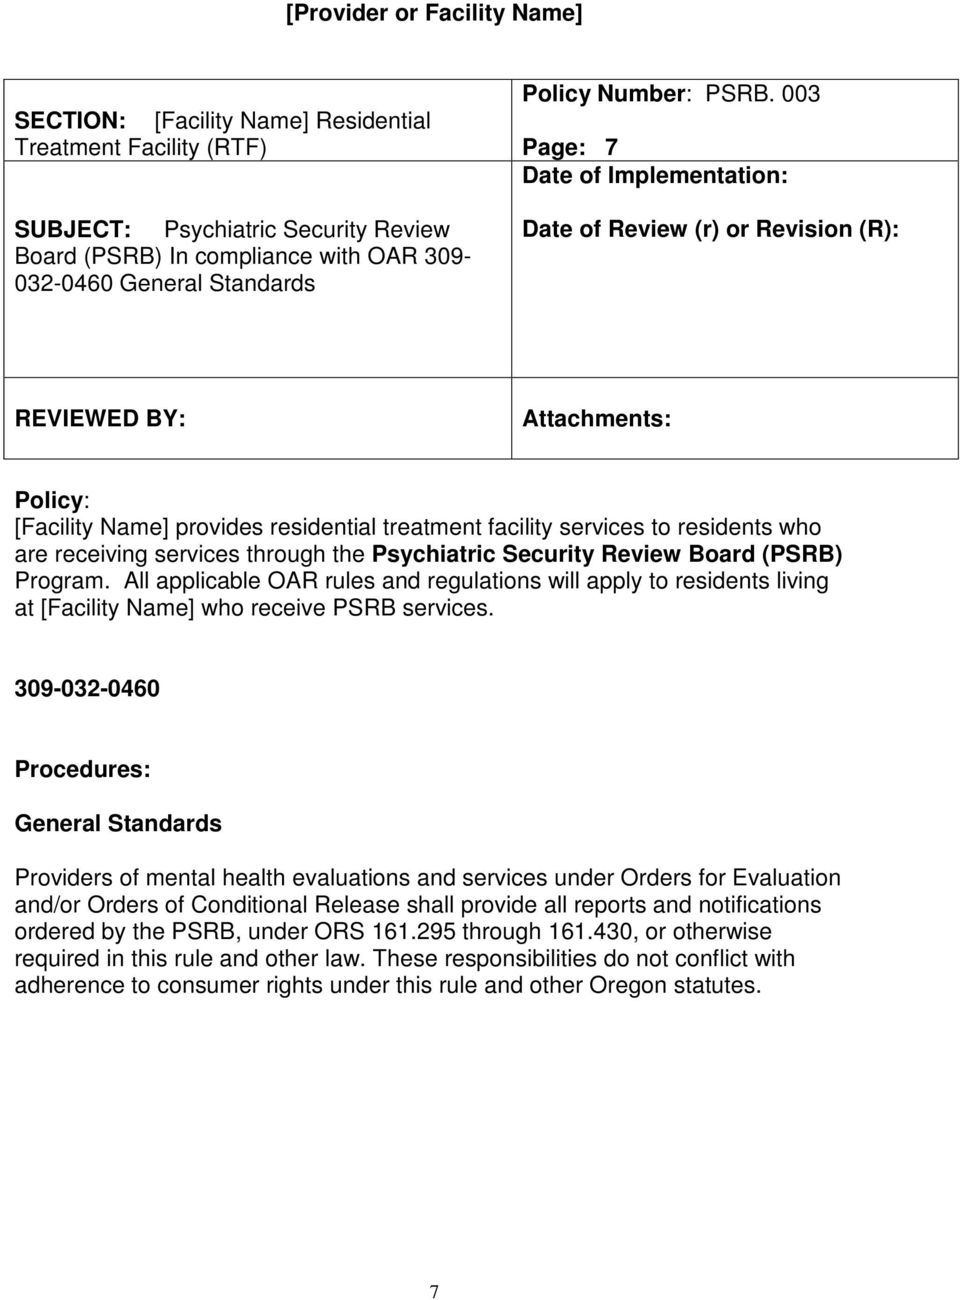 003 Page: 7 Date of Implementation: Date of Review (r) or Revision (R): REVIEWED BY: Attachments: Policy: [Facility Name] provides residential treatment facility services to residents who are